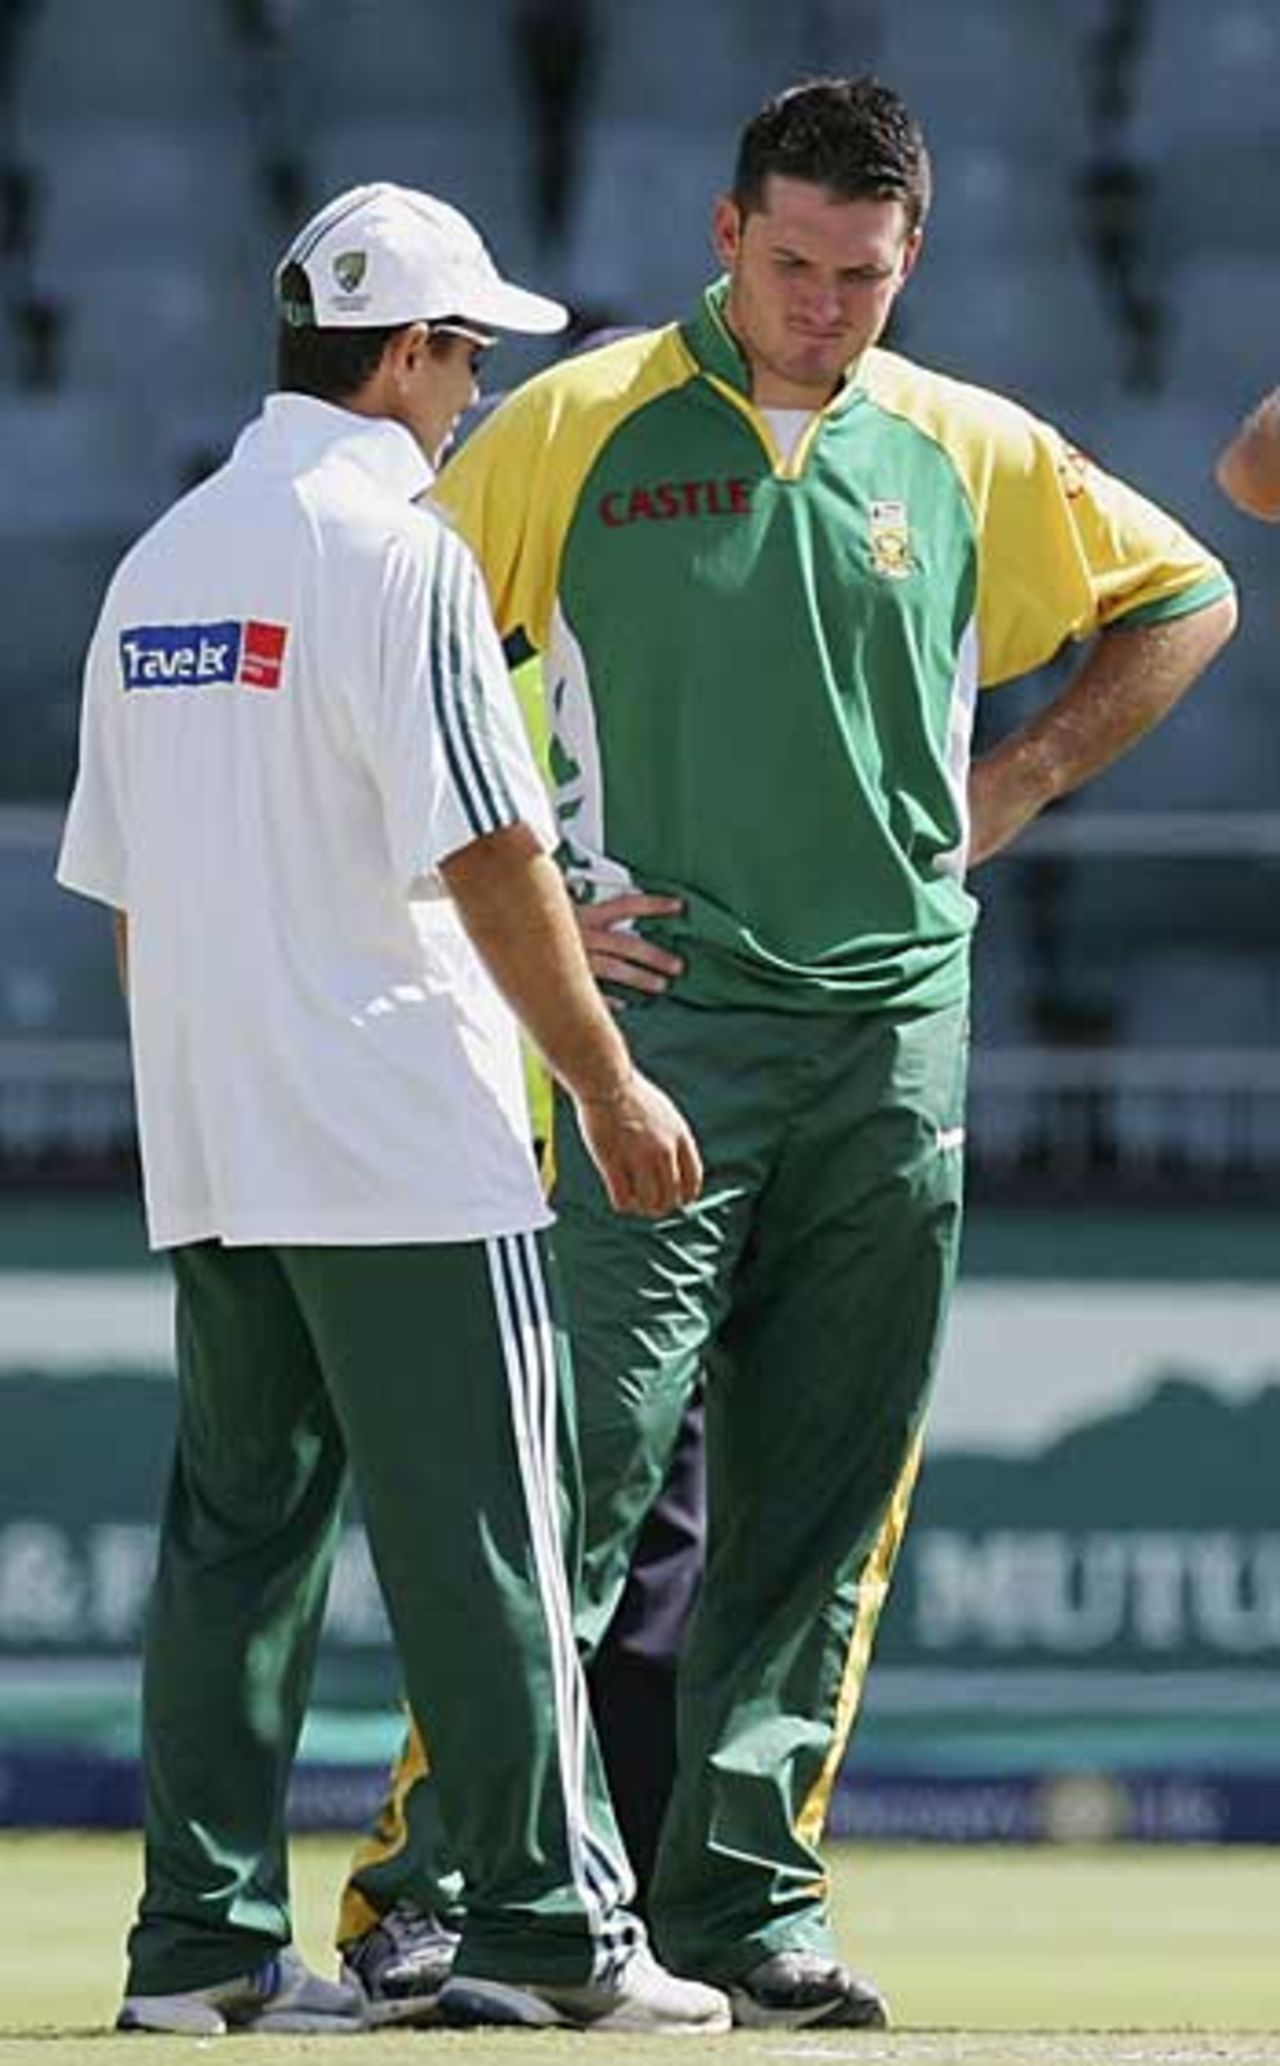 Justin Langer chats with Graeme Smith ahead of the final day's play, South Africa v Australia, 3rd Test, Johannesburg, 5th day, April 4, 2006